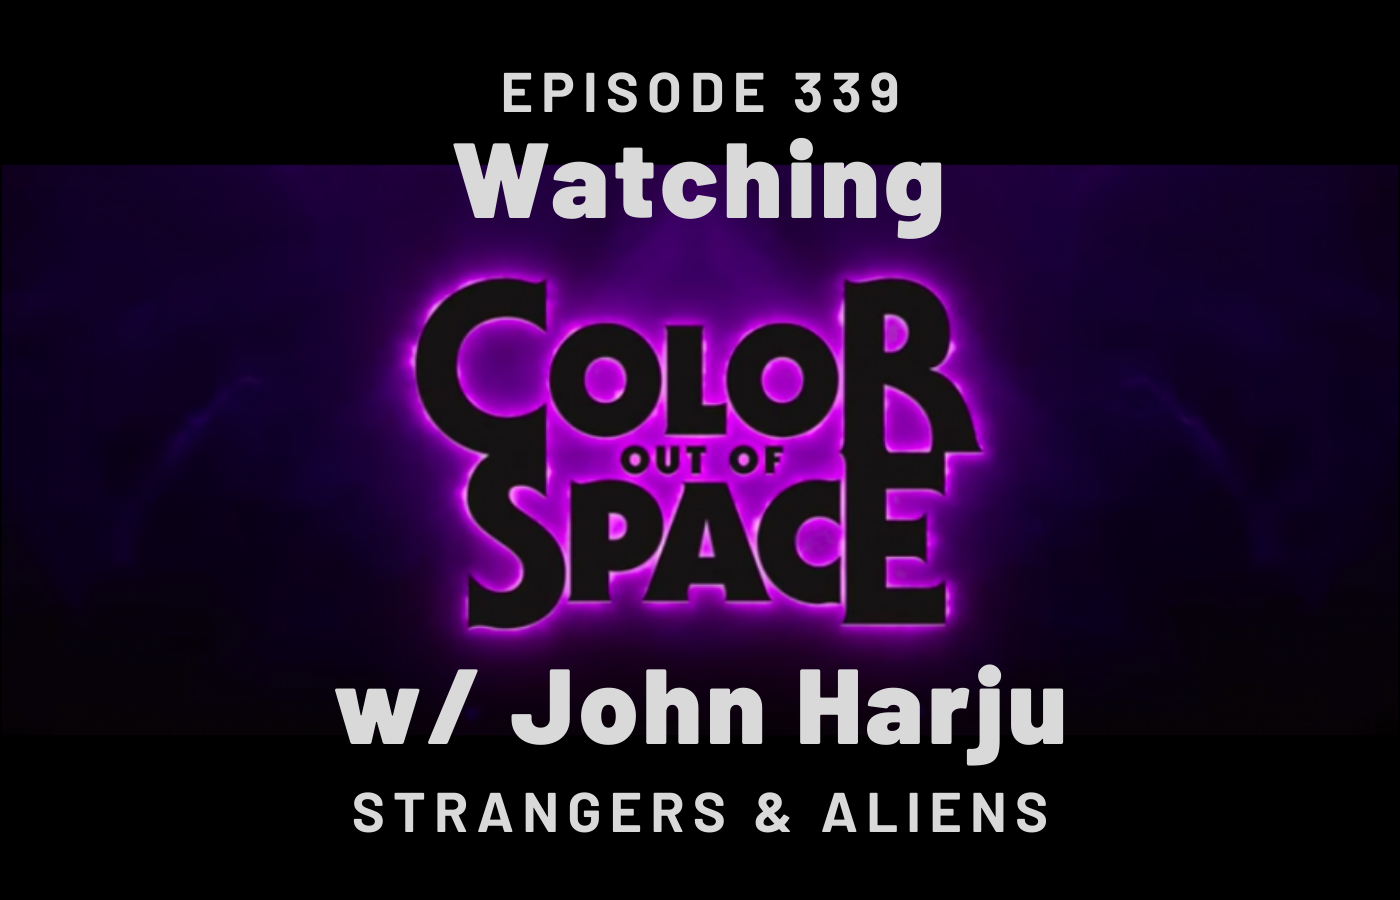 Watching COLOR OUT OF SPACE with John Harju – SA339